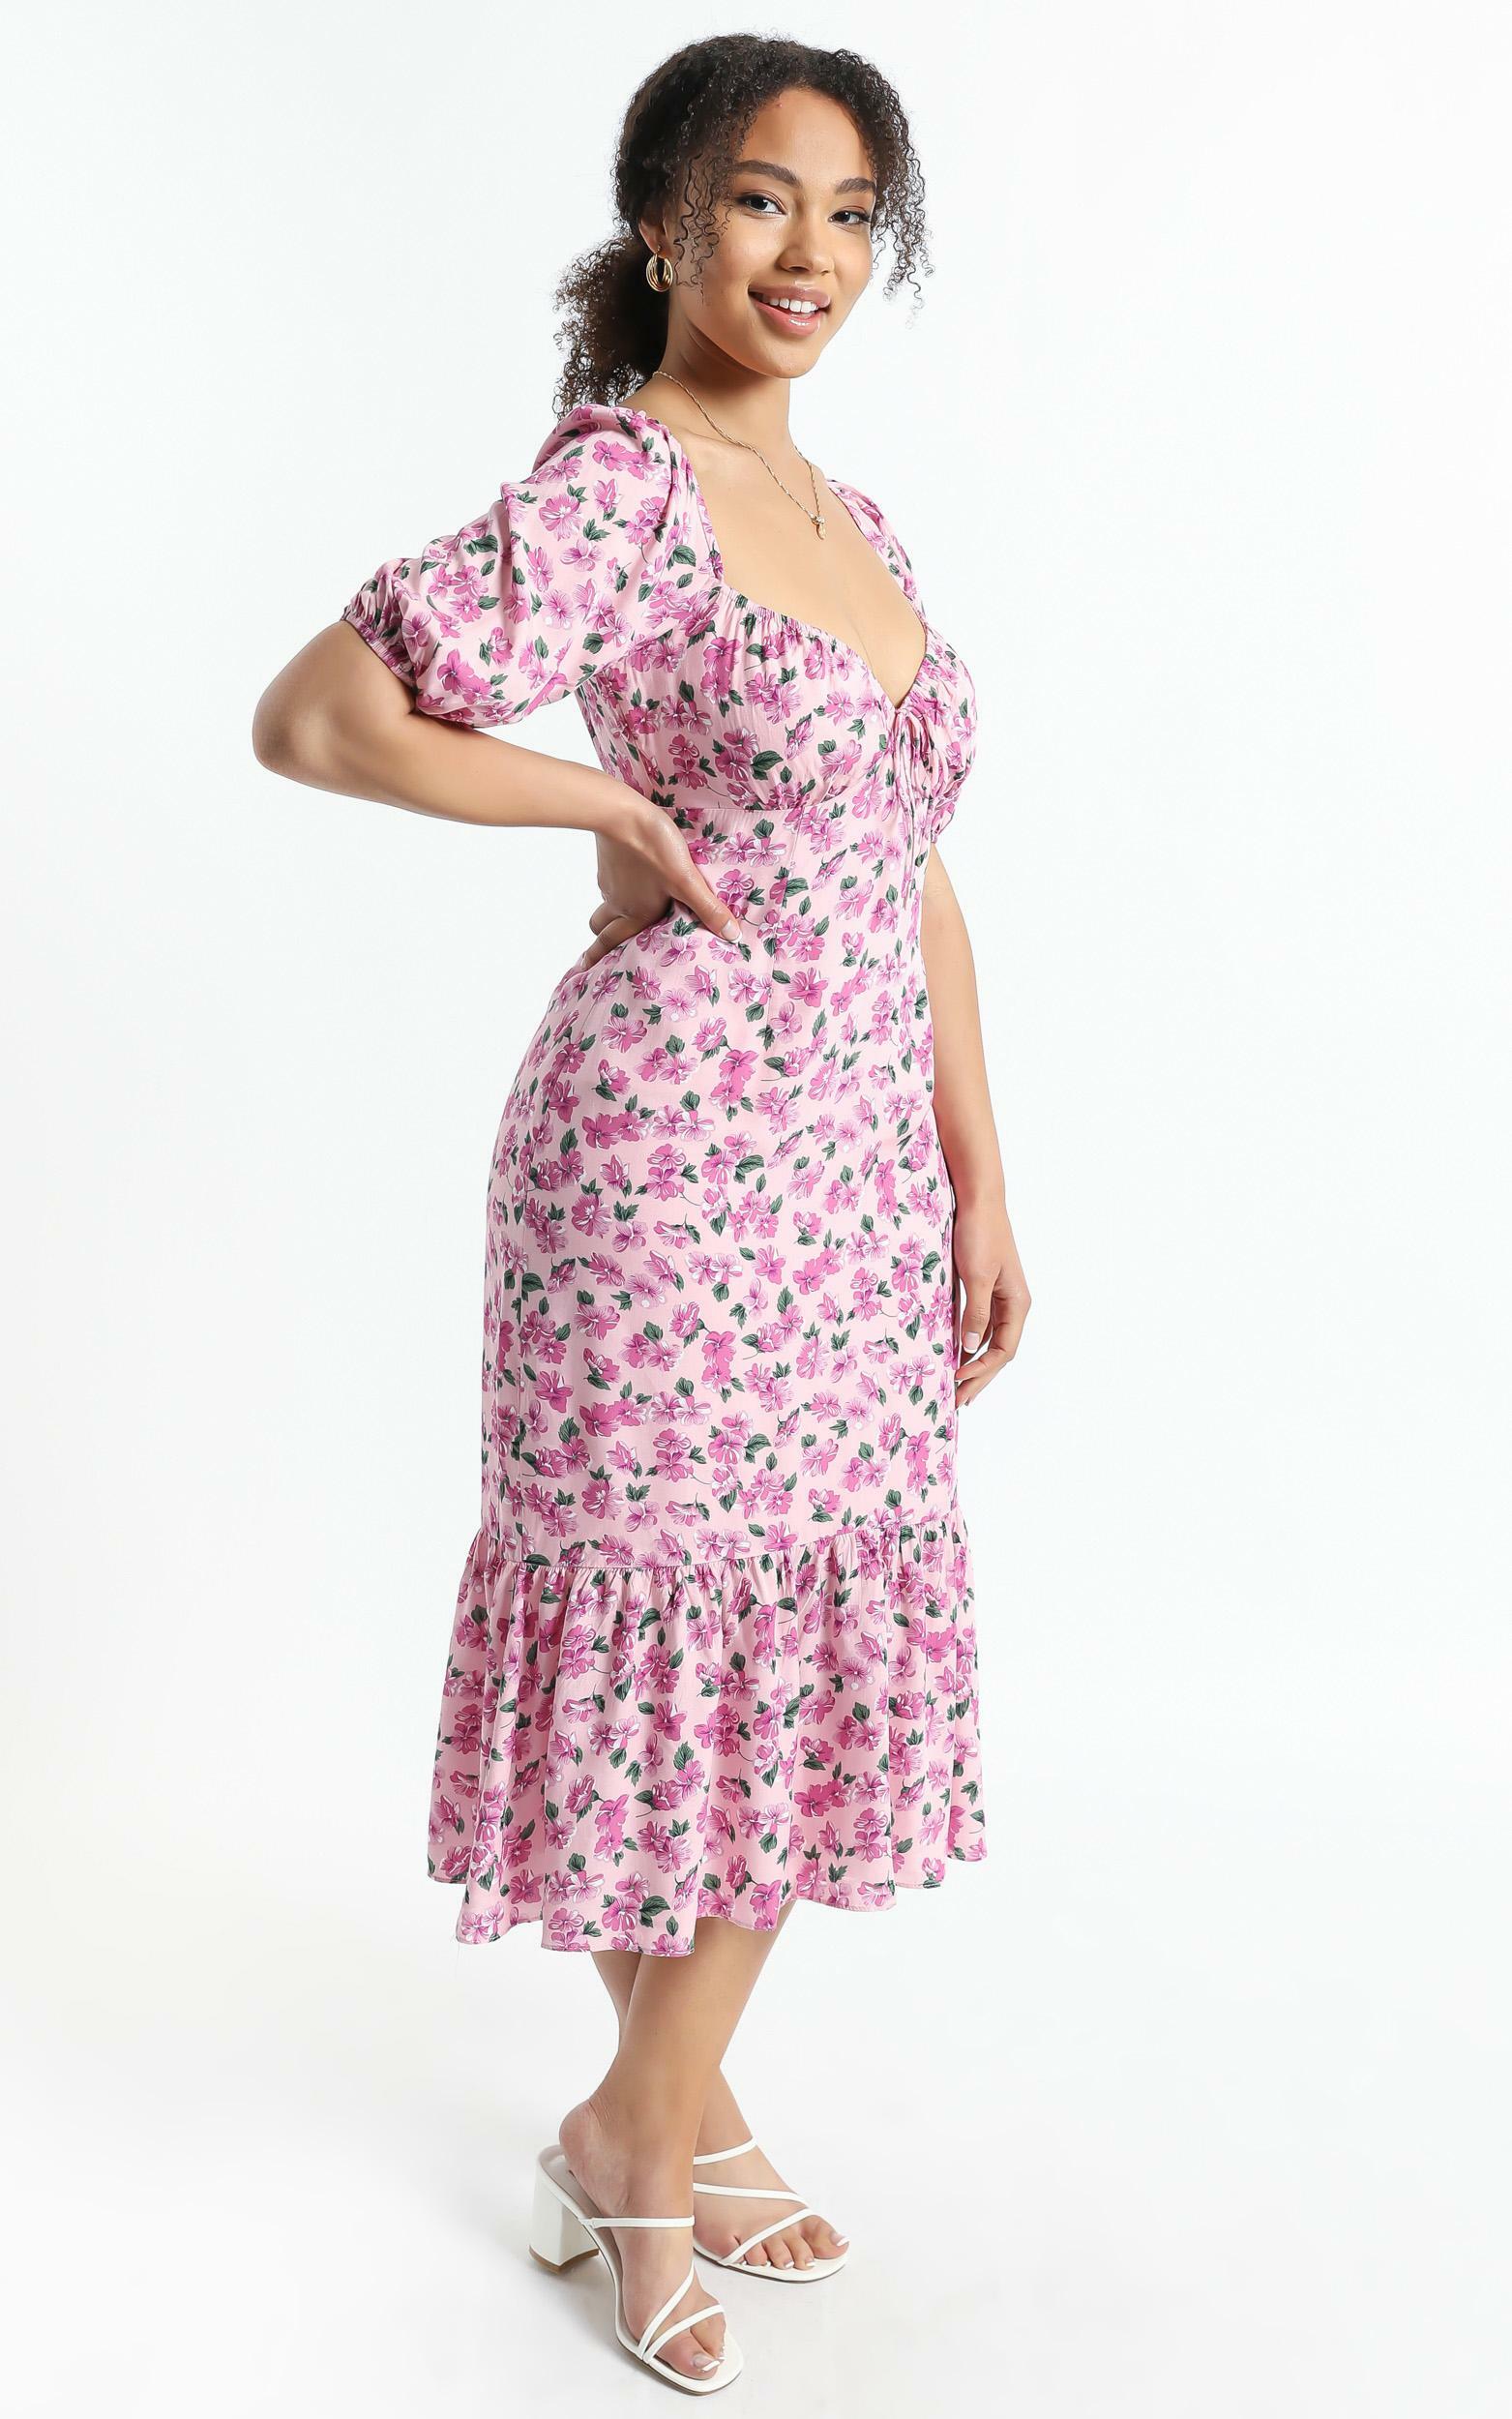 Willow Dress in Lilac Floral - 06, PRP1, hi-res image number null